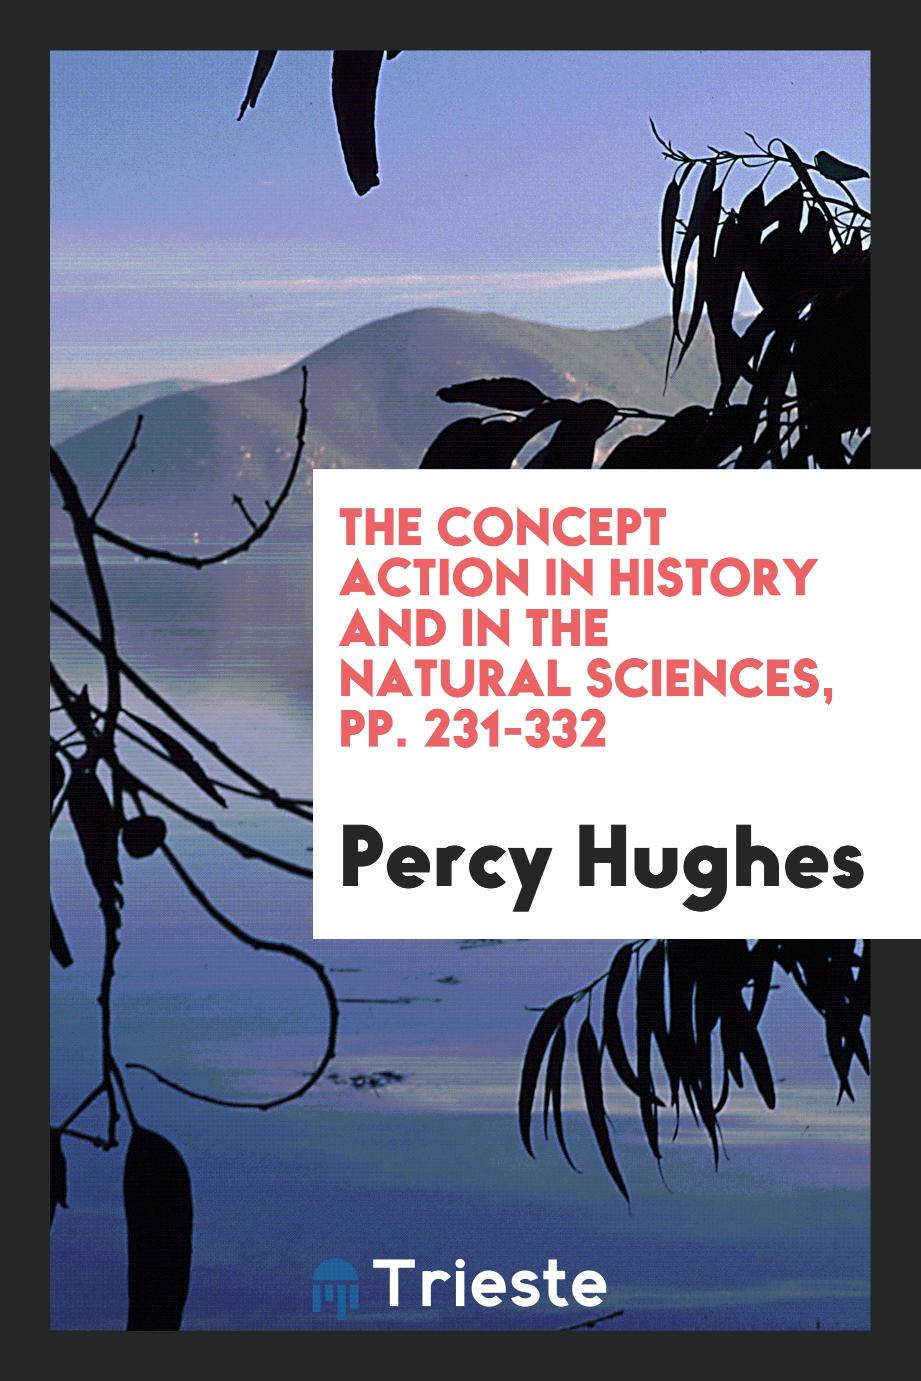 The Concept Action in History and in the Natural Sciences, pp. 231-332